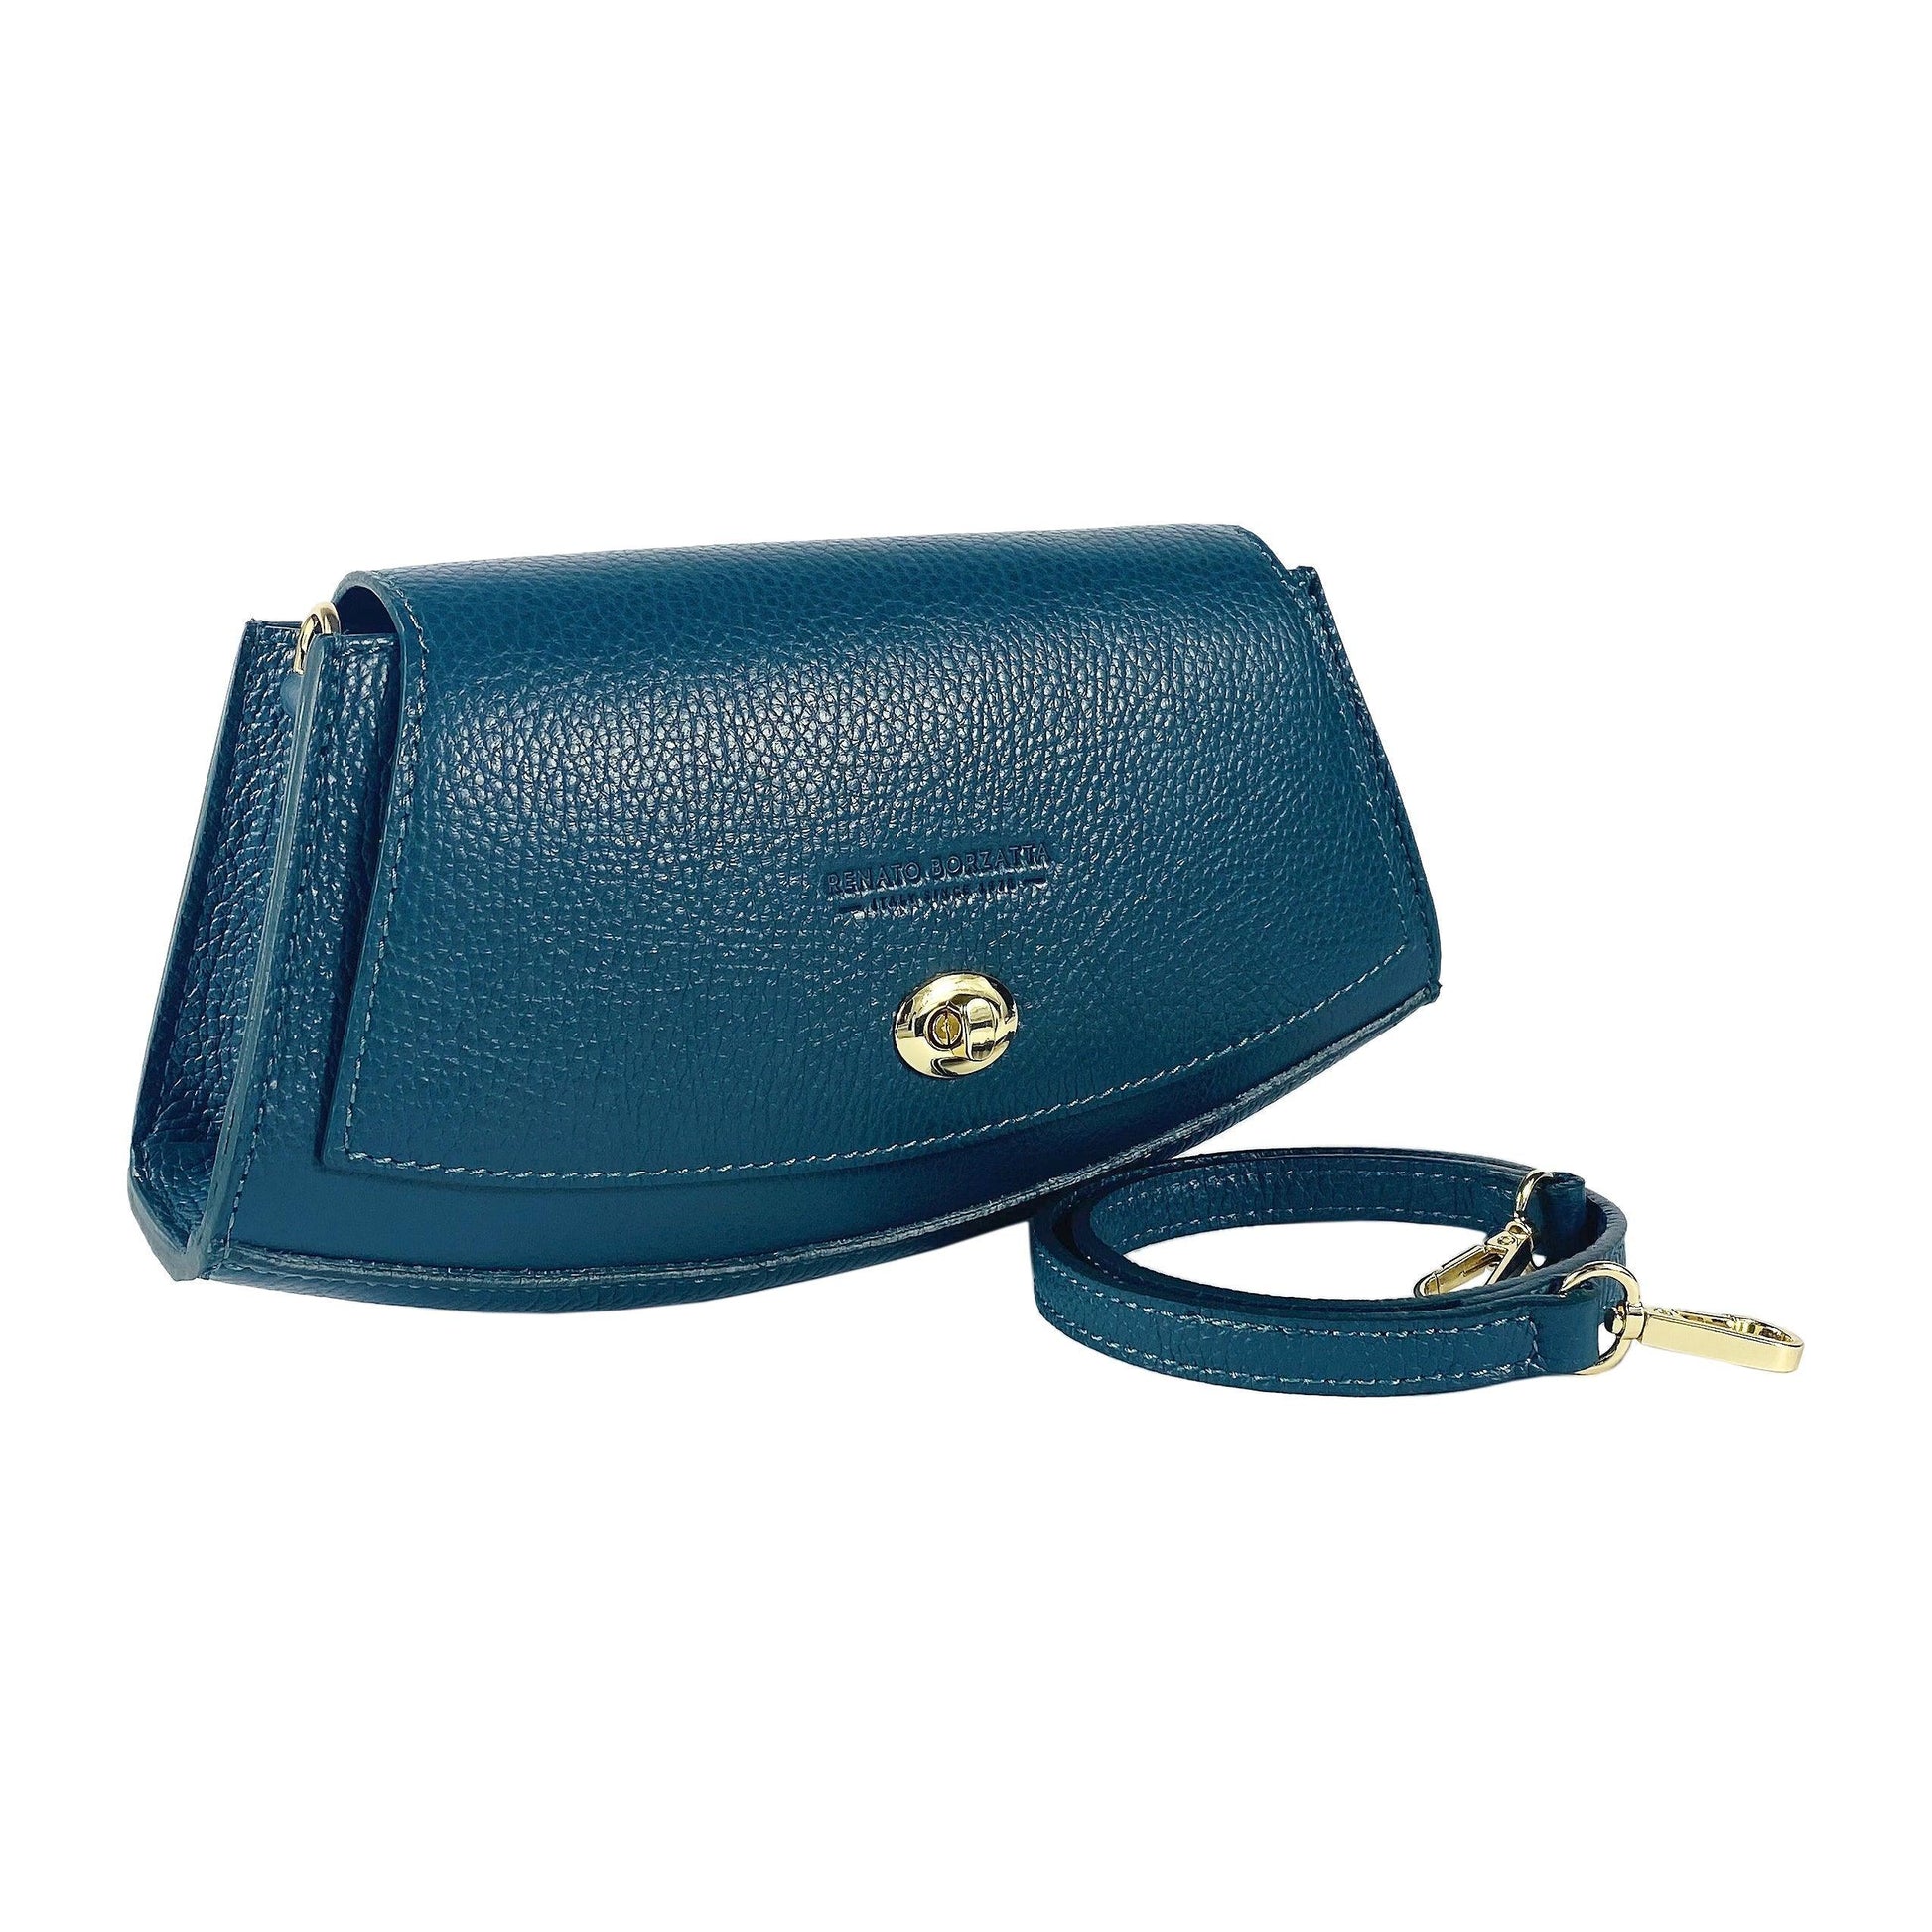 RB1009E | Woman Shoulder Bag in Genuine Leather | 20 x 15 x 9 cm-0